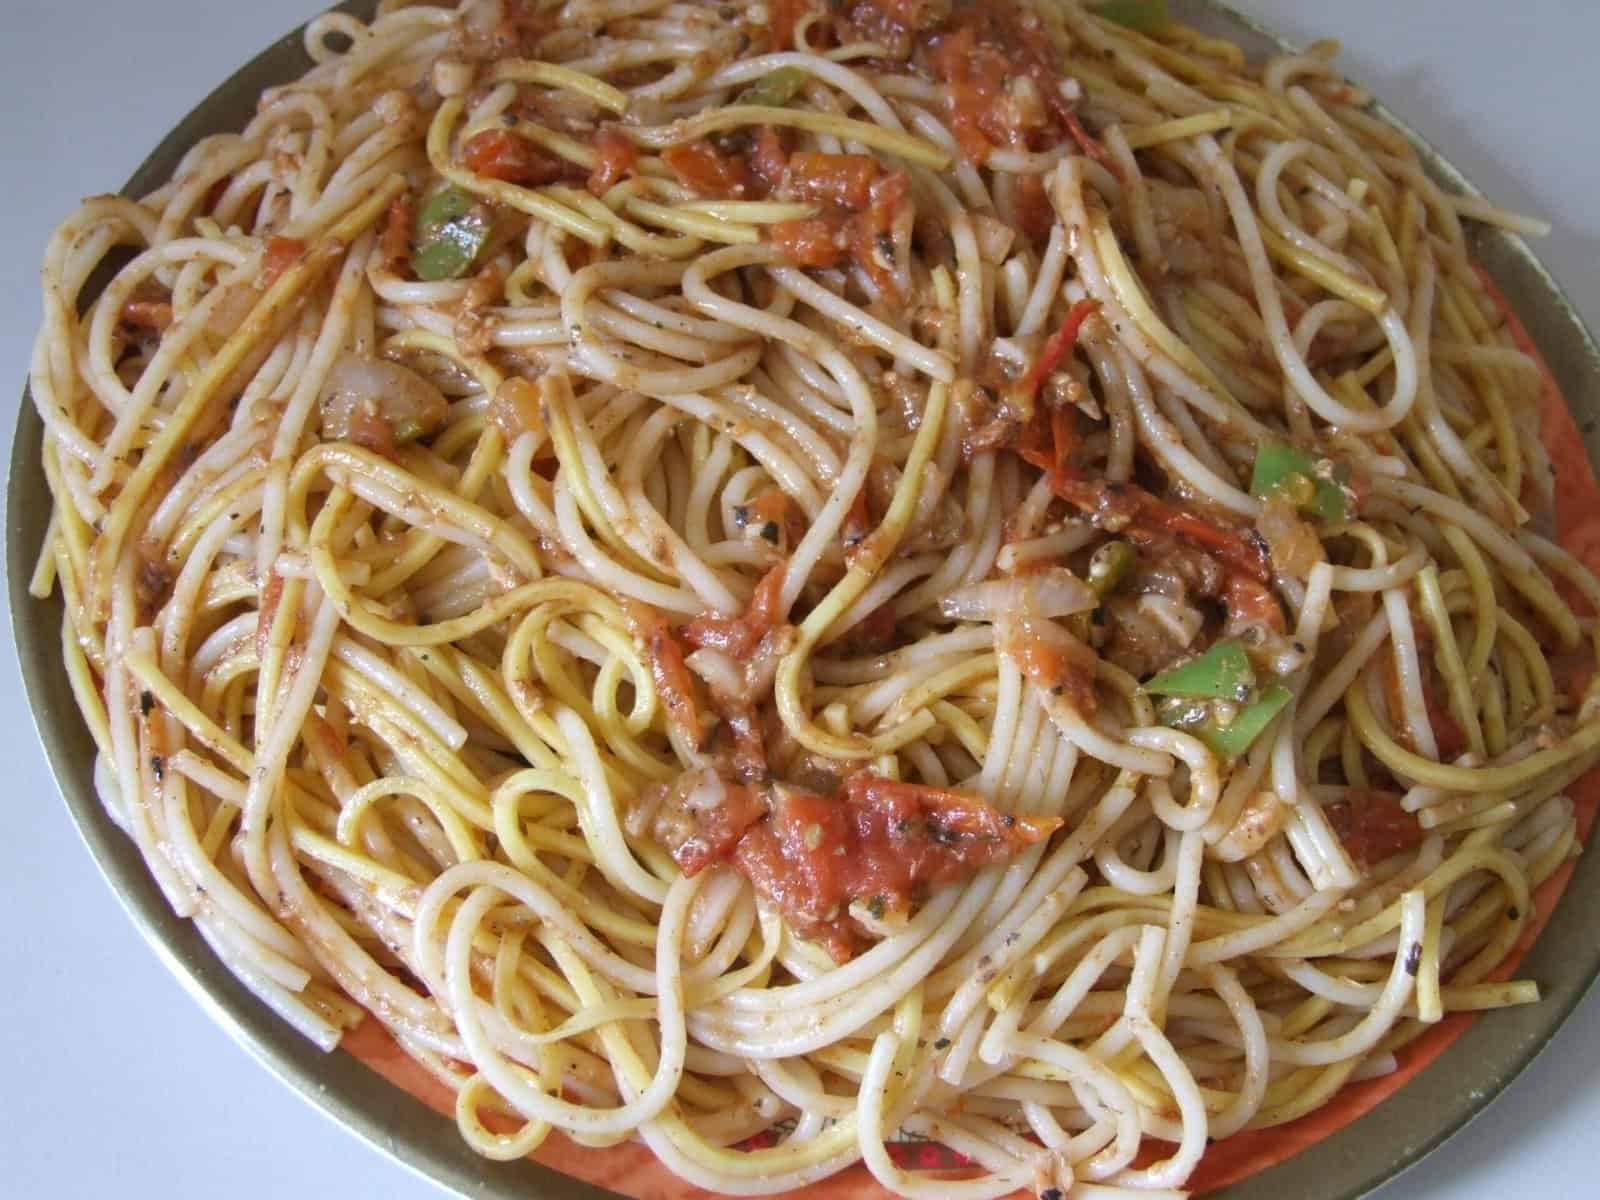 Pasta & Chinese Udong Noodles in Tomato Sauce & Sardines Recipe